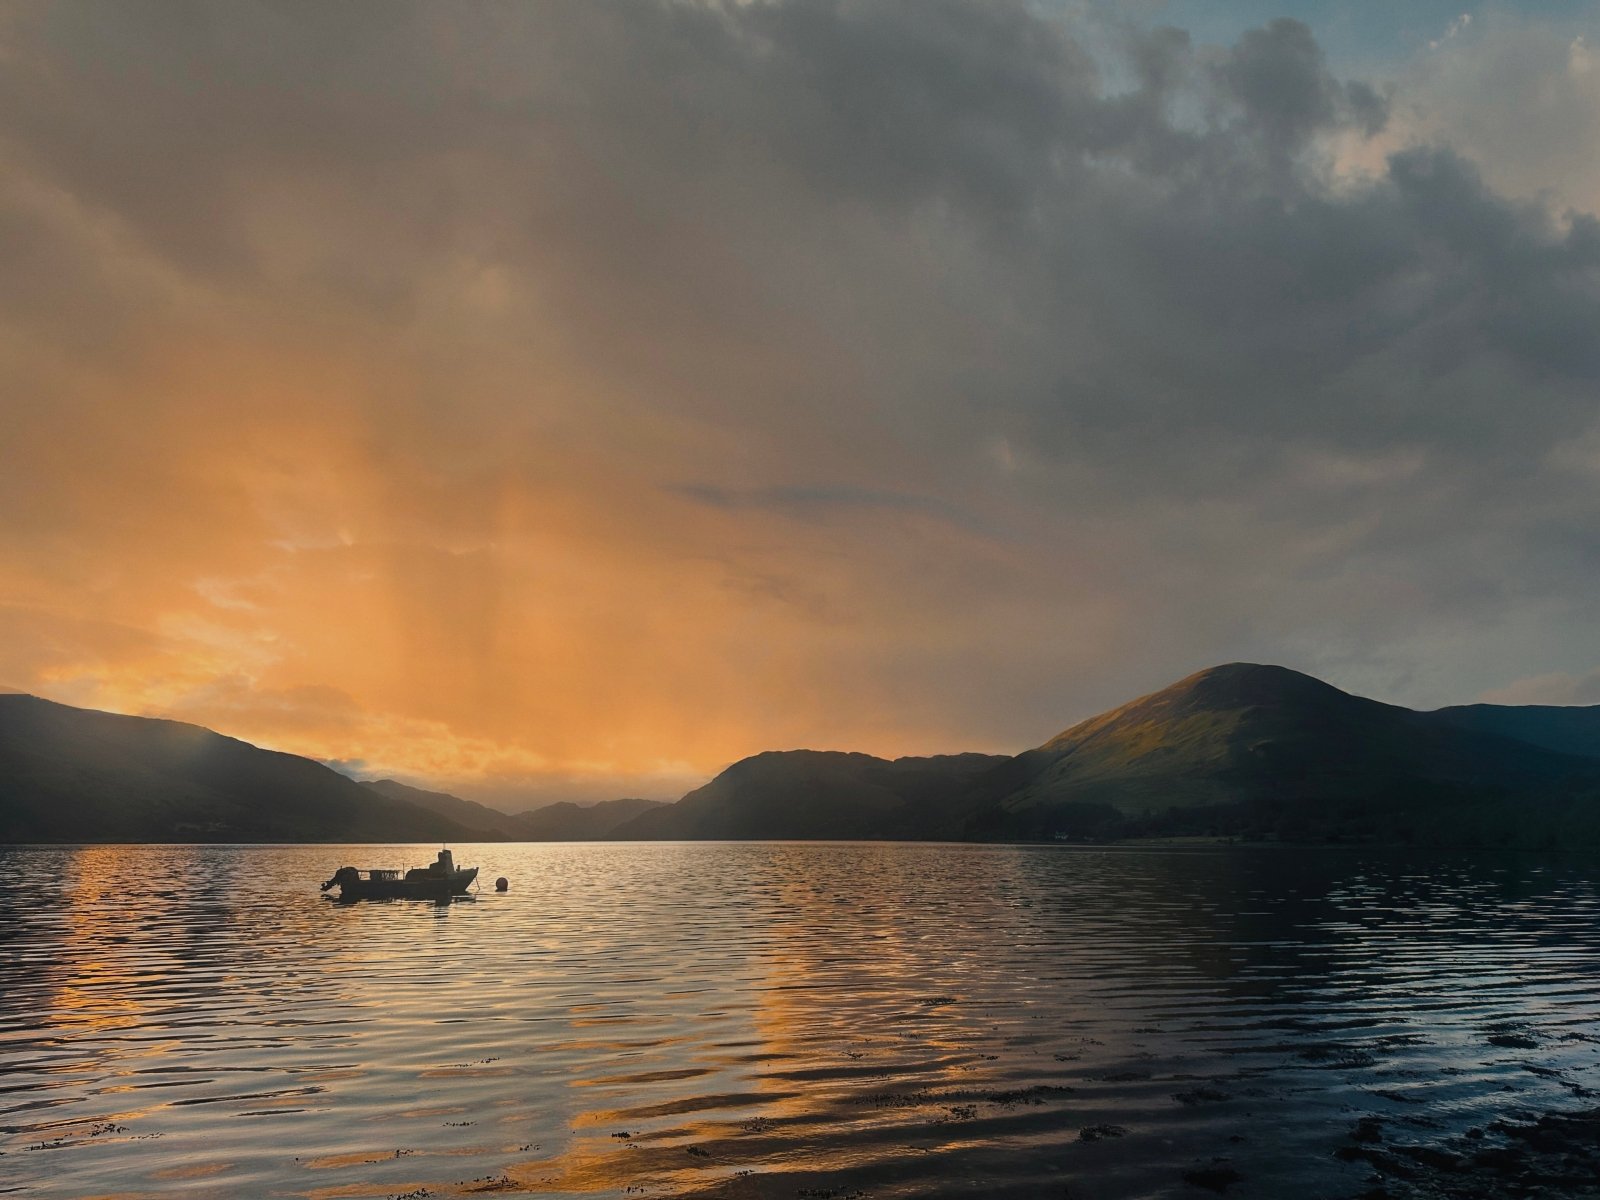 Loch Striven Sunset Scottish Landscape Photography-Scottish Landscape Photography-Scottish Lochs & Mountains Art Gallery-Paintings, Prints, Homeware, Art Gifts From Scotland By Scottish Artist Kevin Hunter